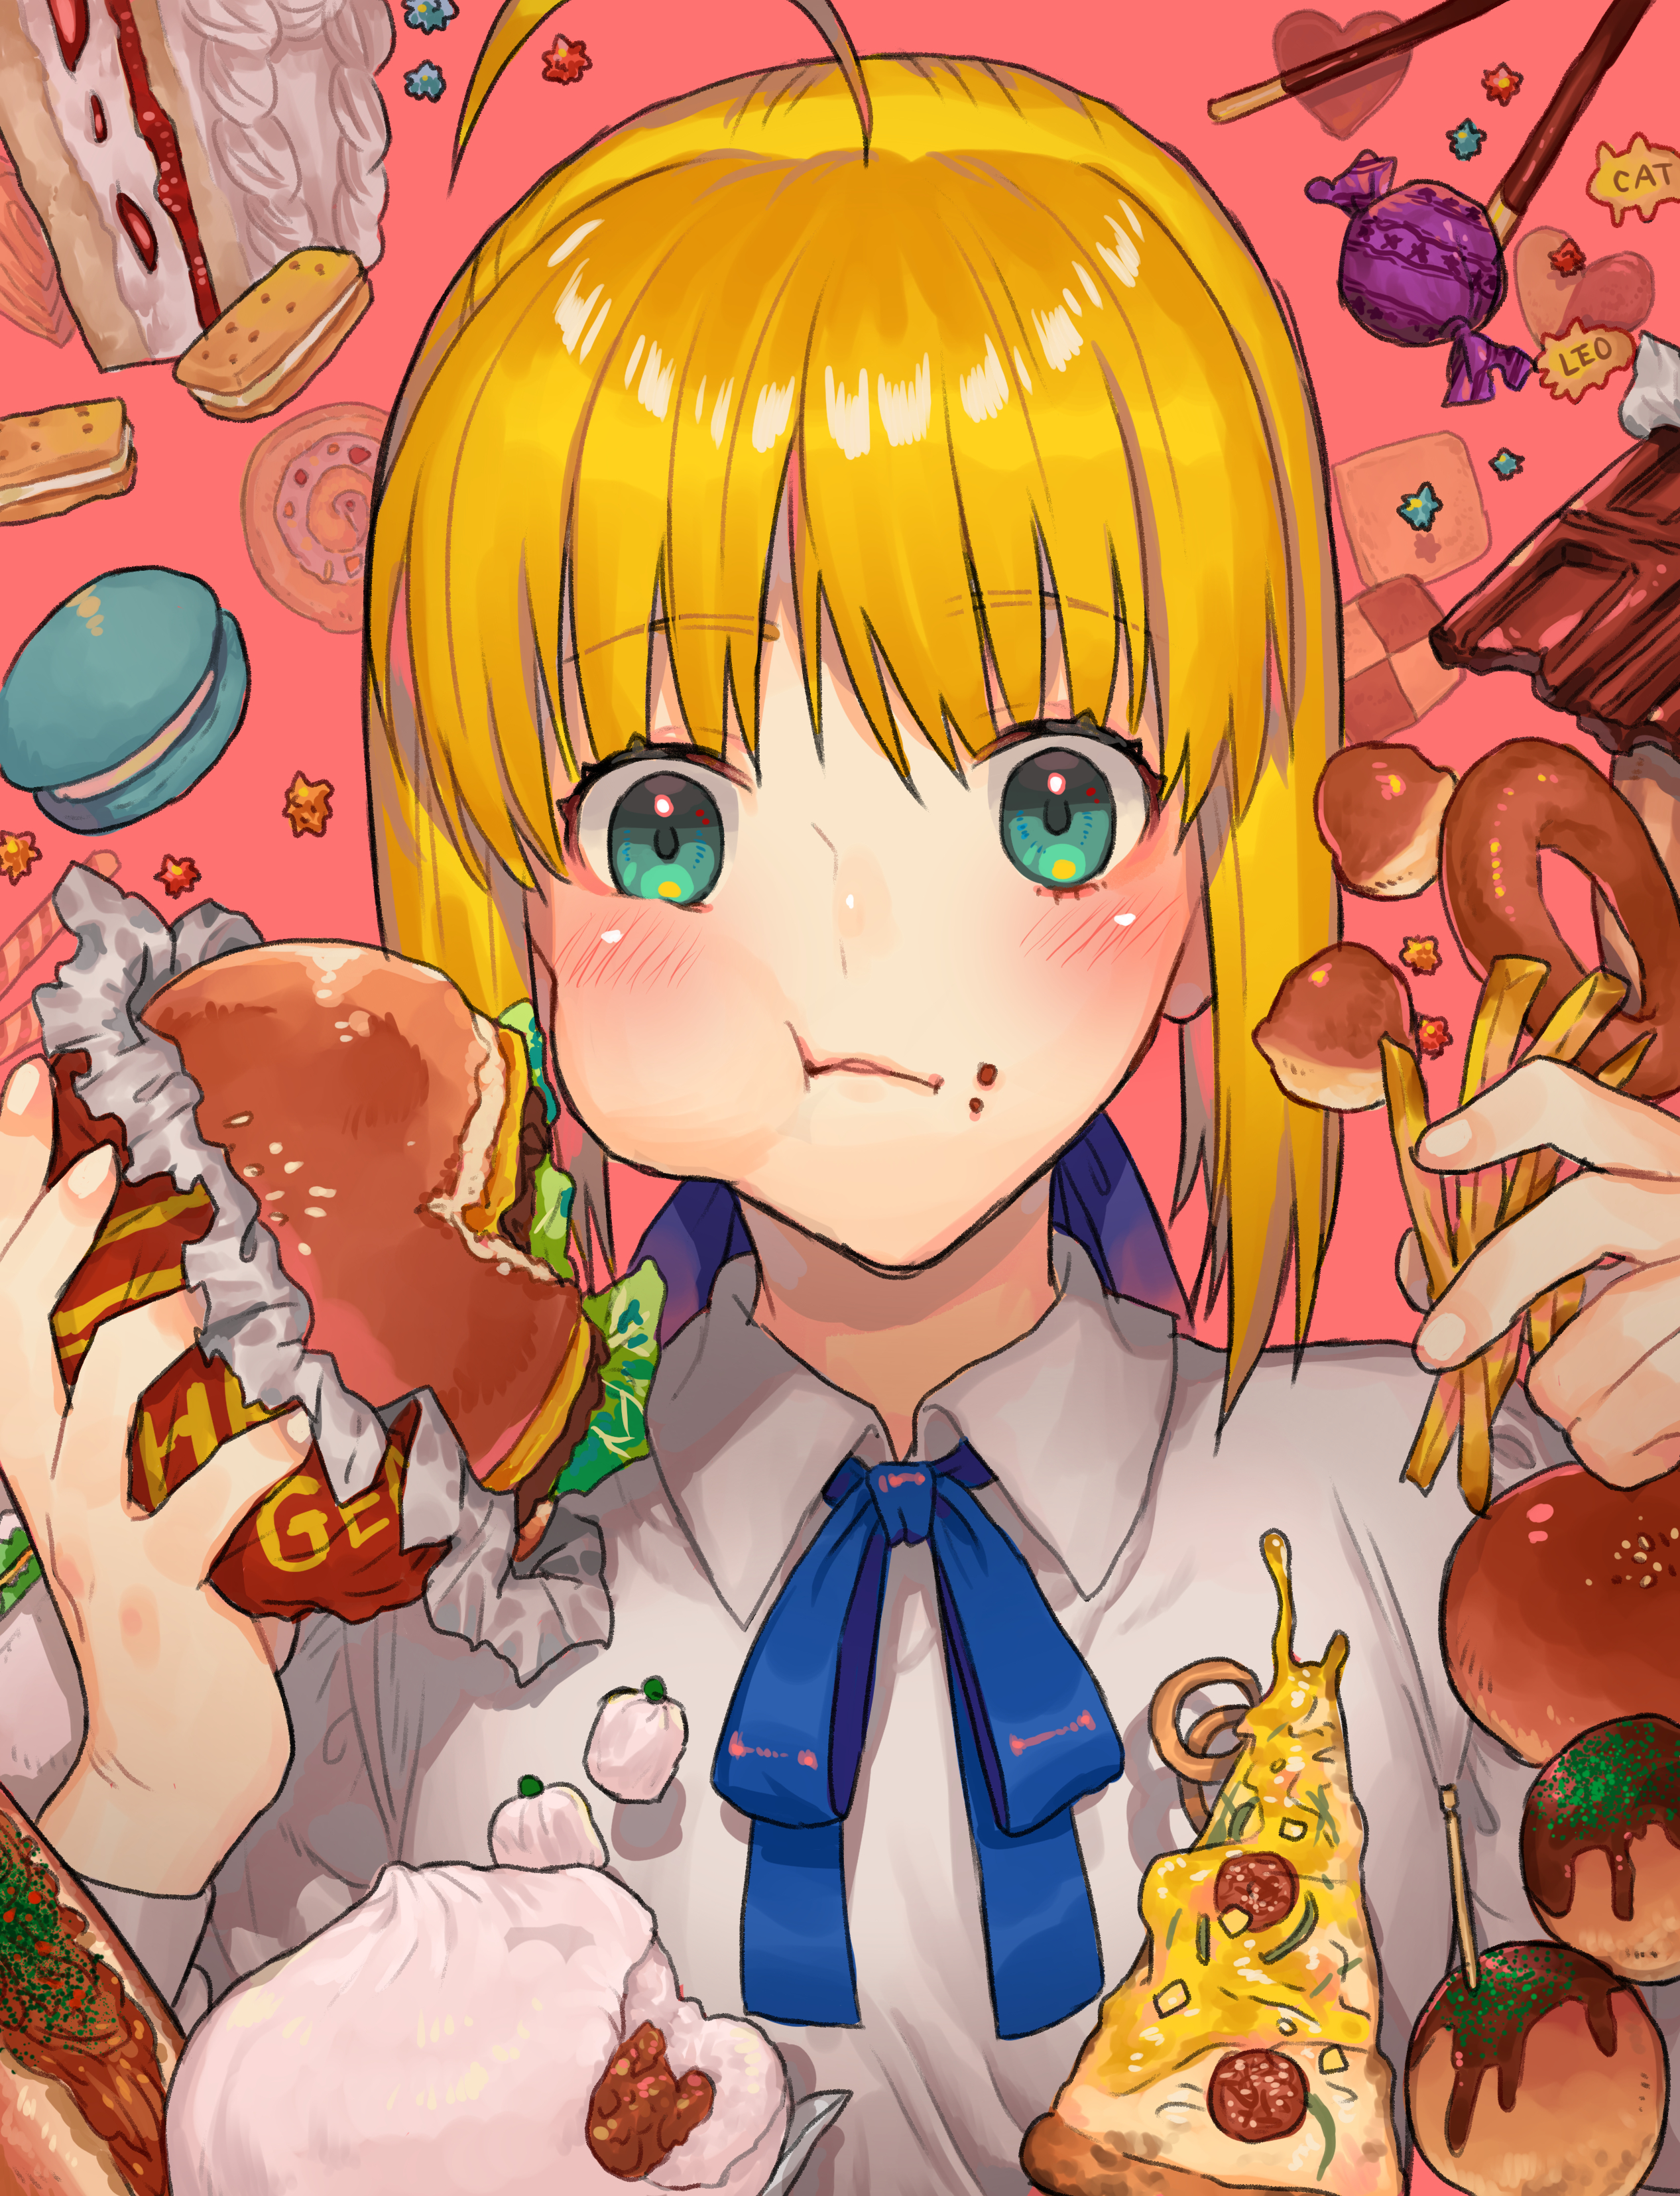 Anime 2534x3312 Fate series Fate/Stay Night anime girls ahoge anime girls eating burgers pizza blue ribbons 2D blushing Saber green eyes candy cake donut looking at viewer fan art blonde Artoria Pendragon